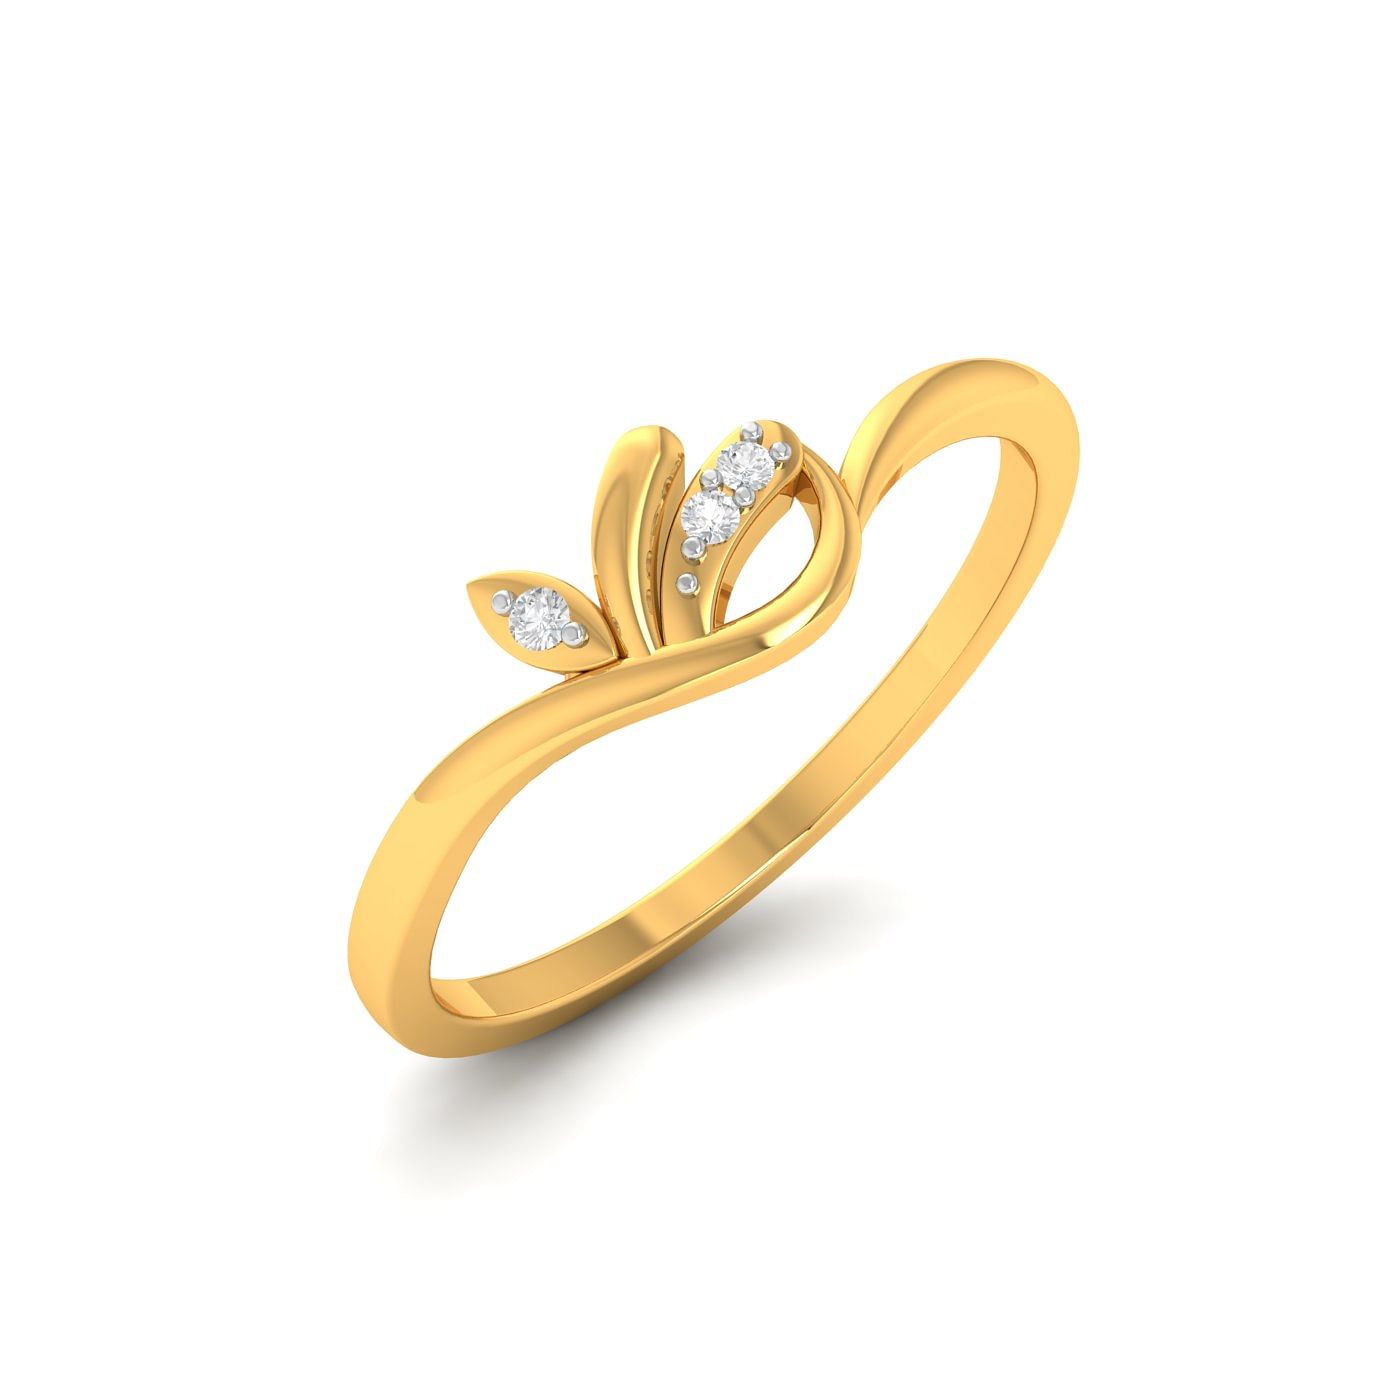 Light weight yellow gold Appy Three Stone Diamond Ring for her